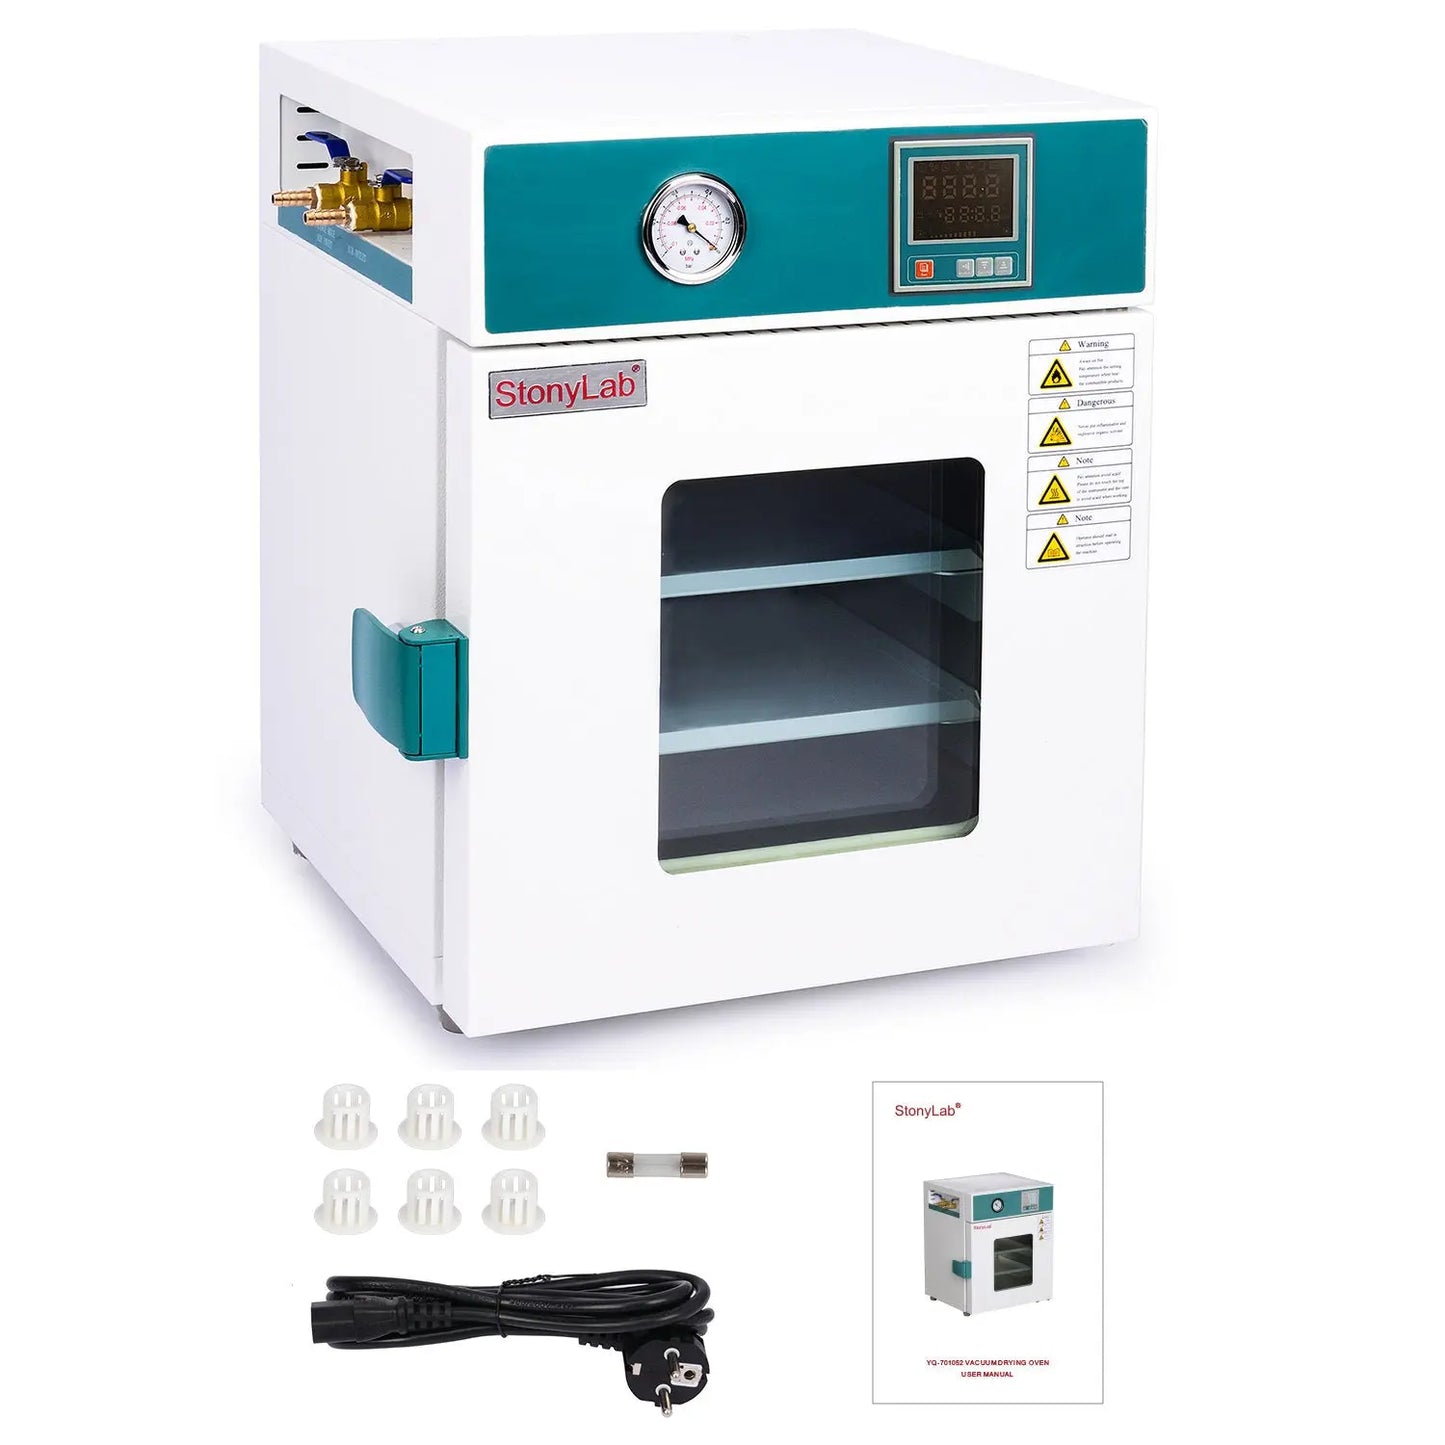 Vacuum Drying Oven with Vacuum Gauge and Digital Controller, 24L/0.9 cu ft Ovens